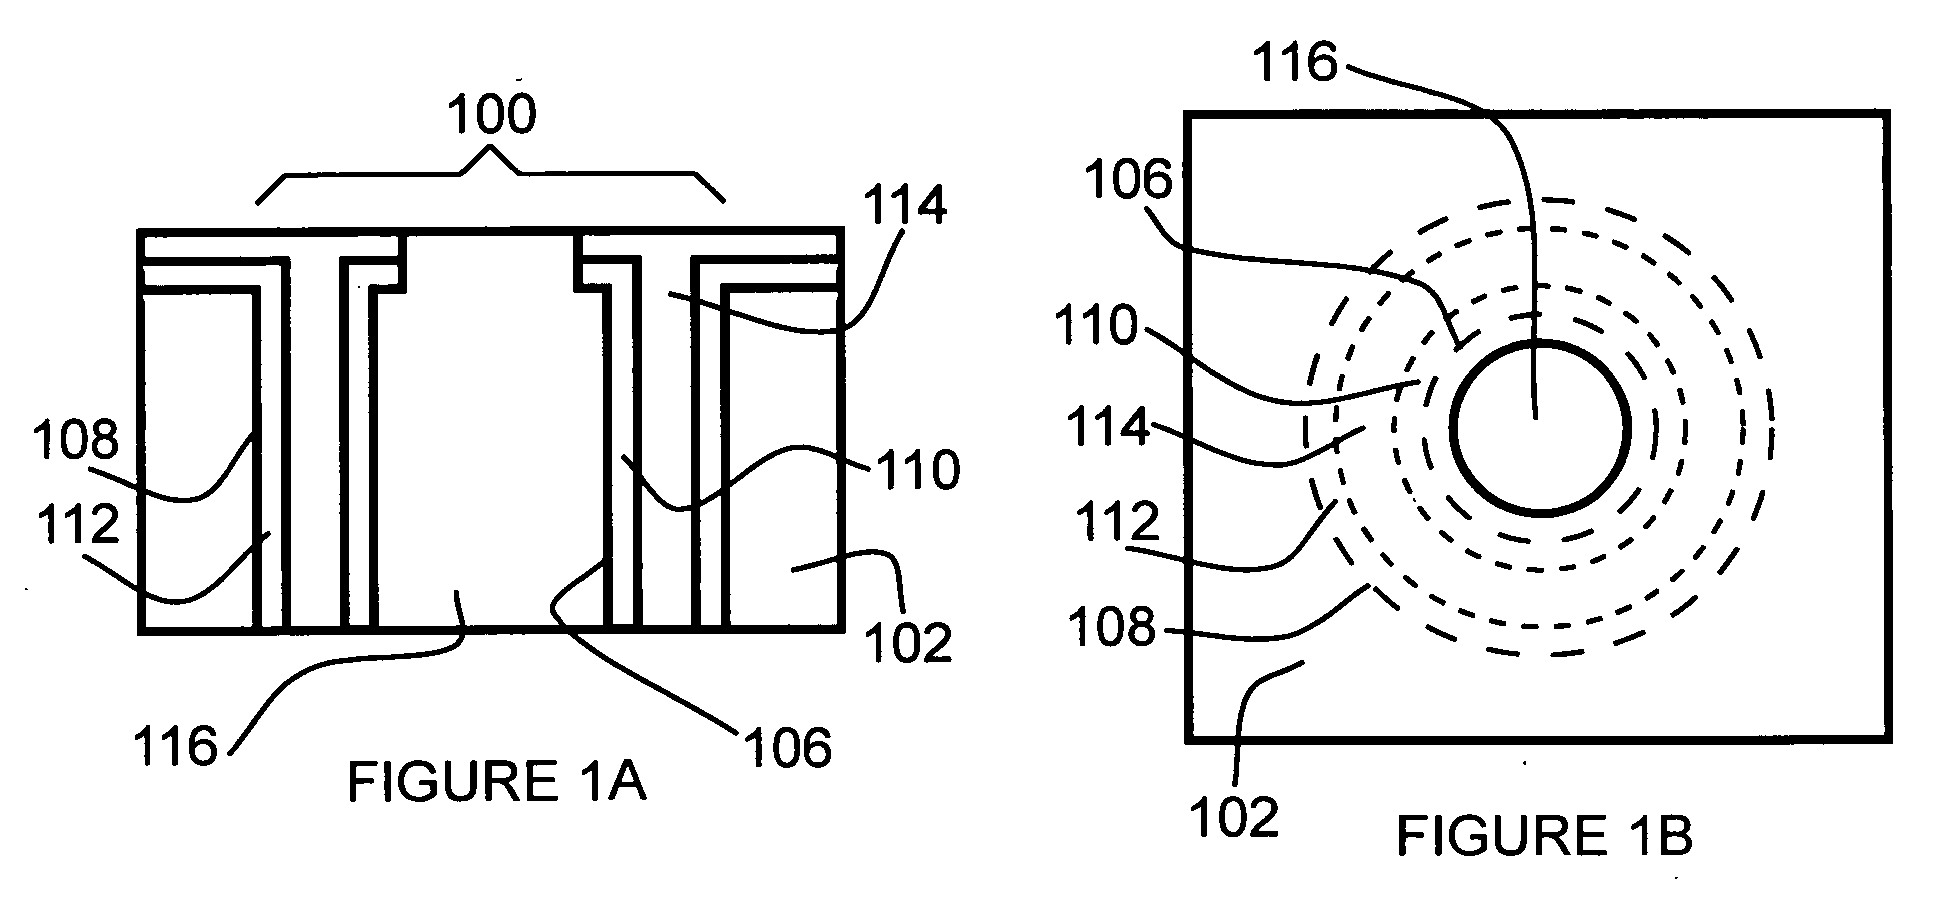 Vertical electrical device